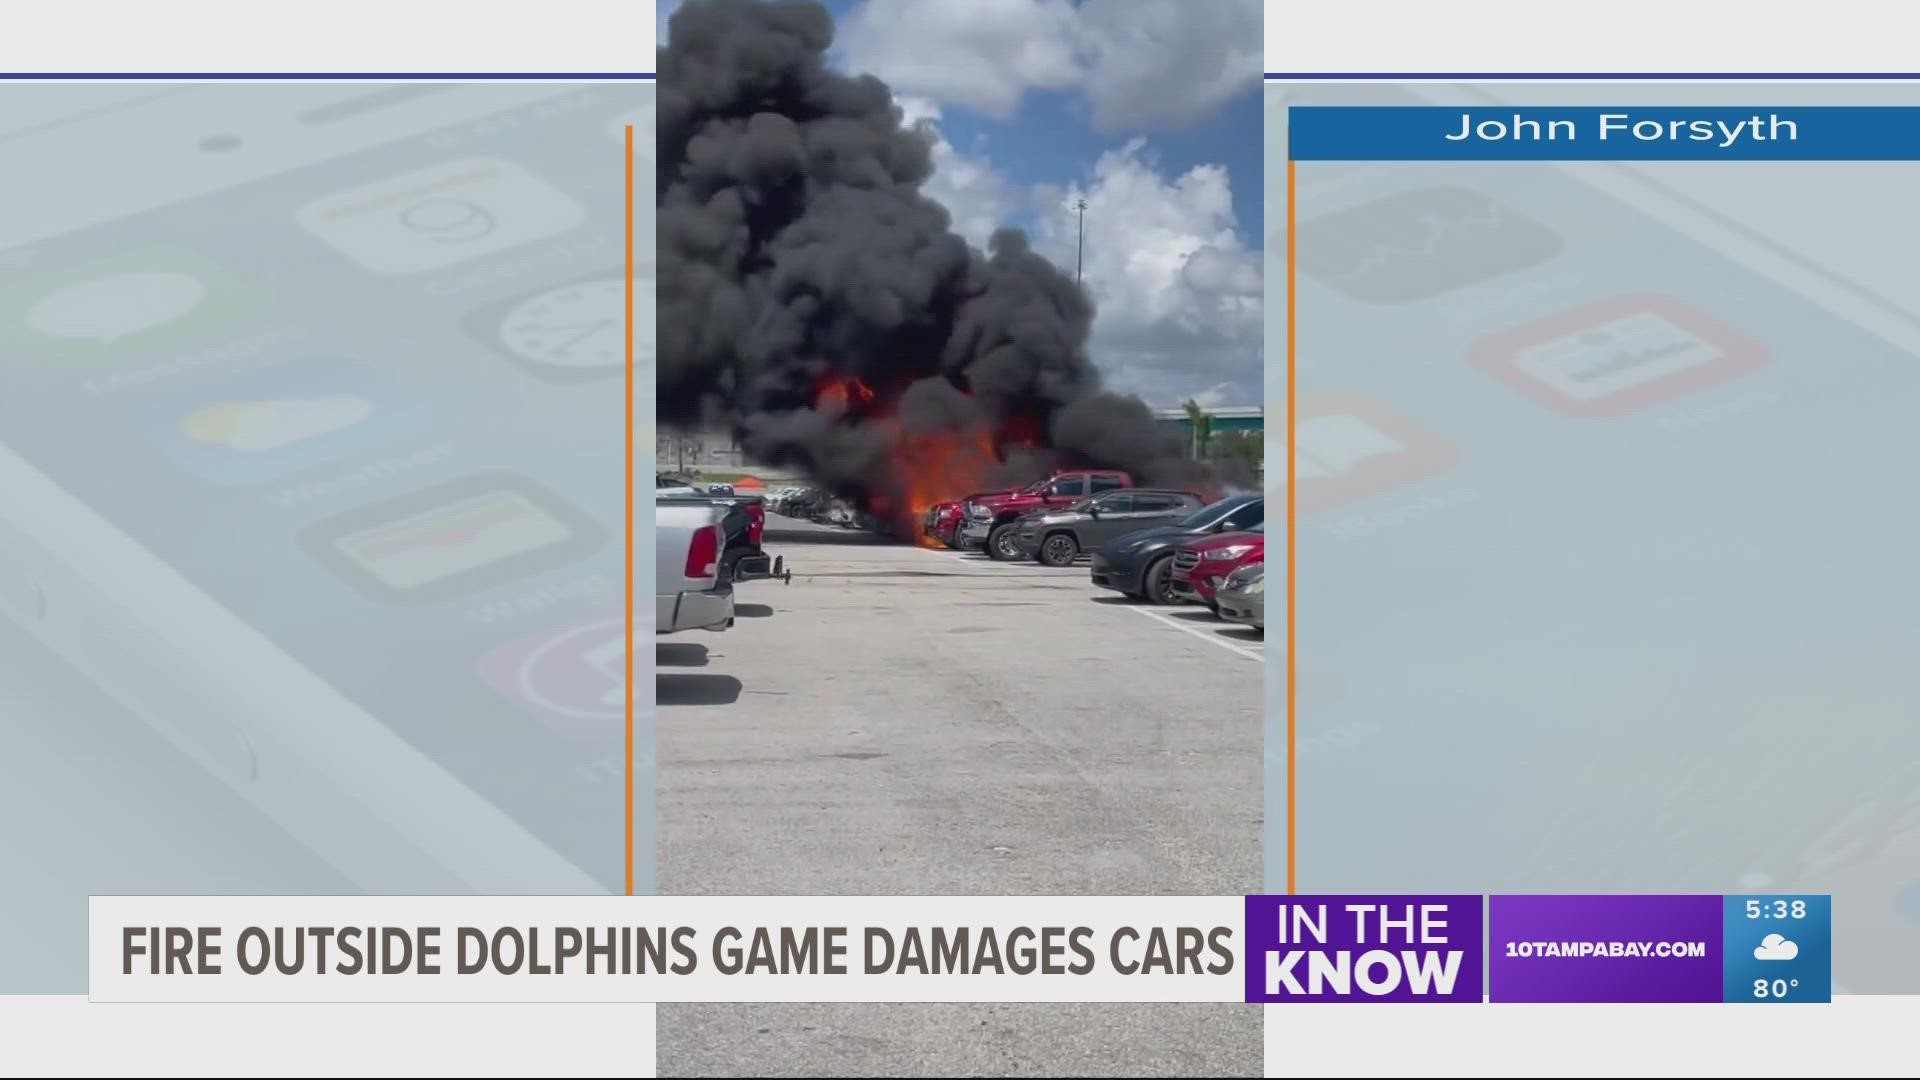 It took more than 10 Miami-Dade Fire units to put out the flames from 11 cars, CBS Sports reports.